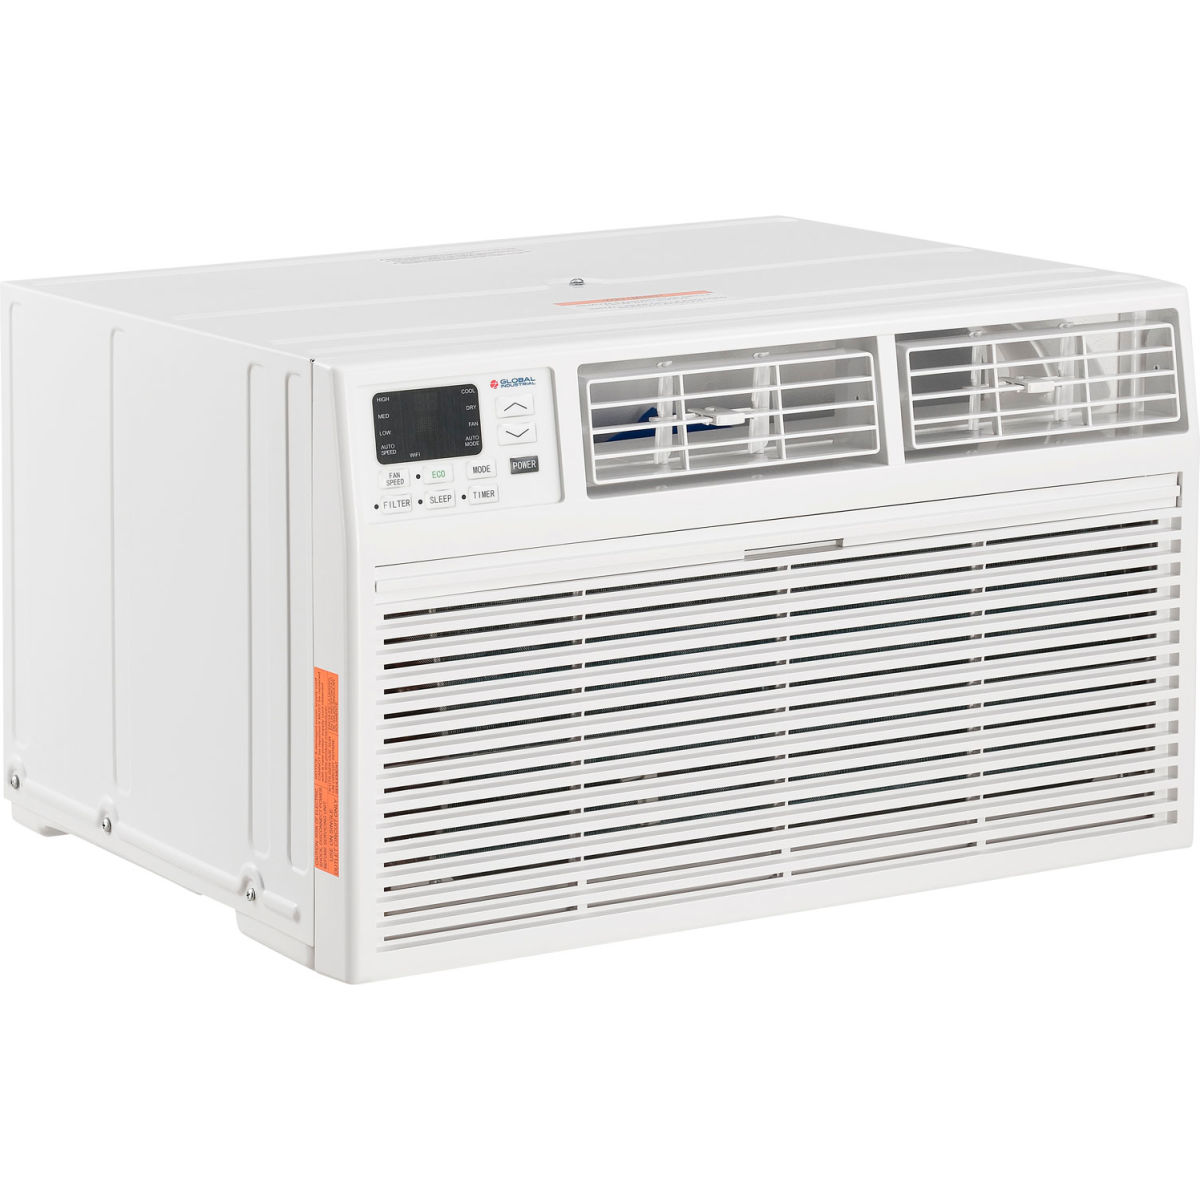 TCL Home Appliances 292855 8000 BTU Energy Star 115V Global Industrial Through The Wall Air Conditioner